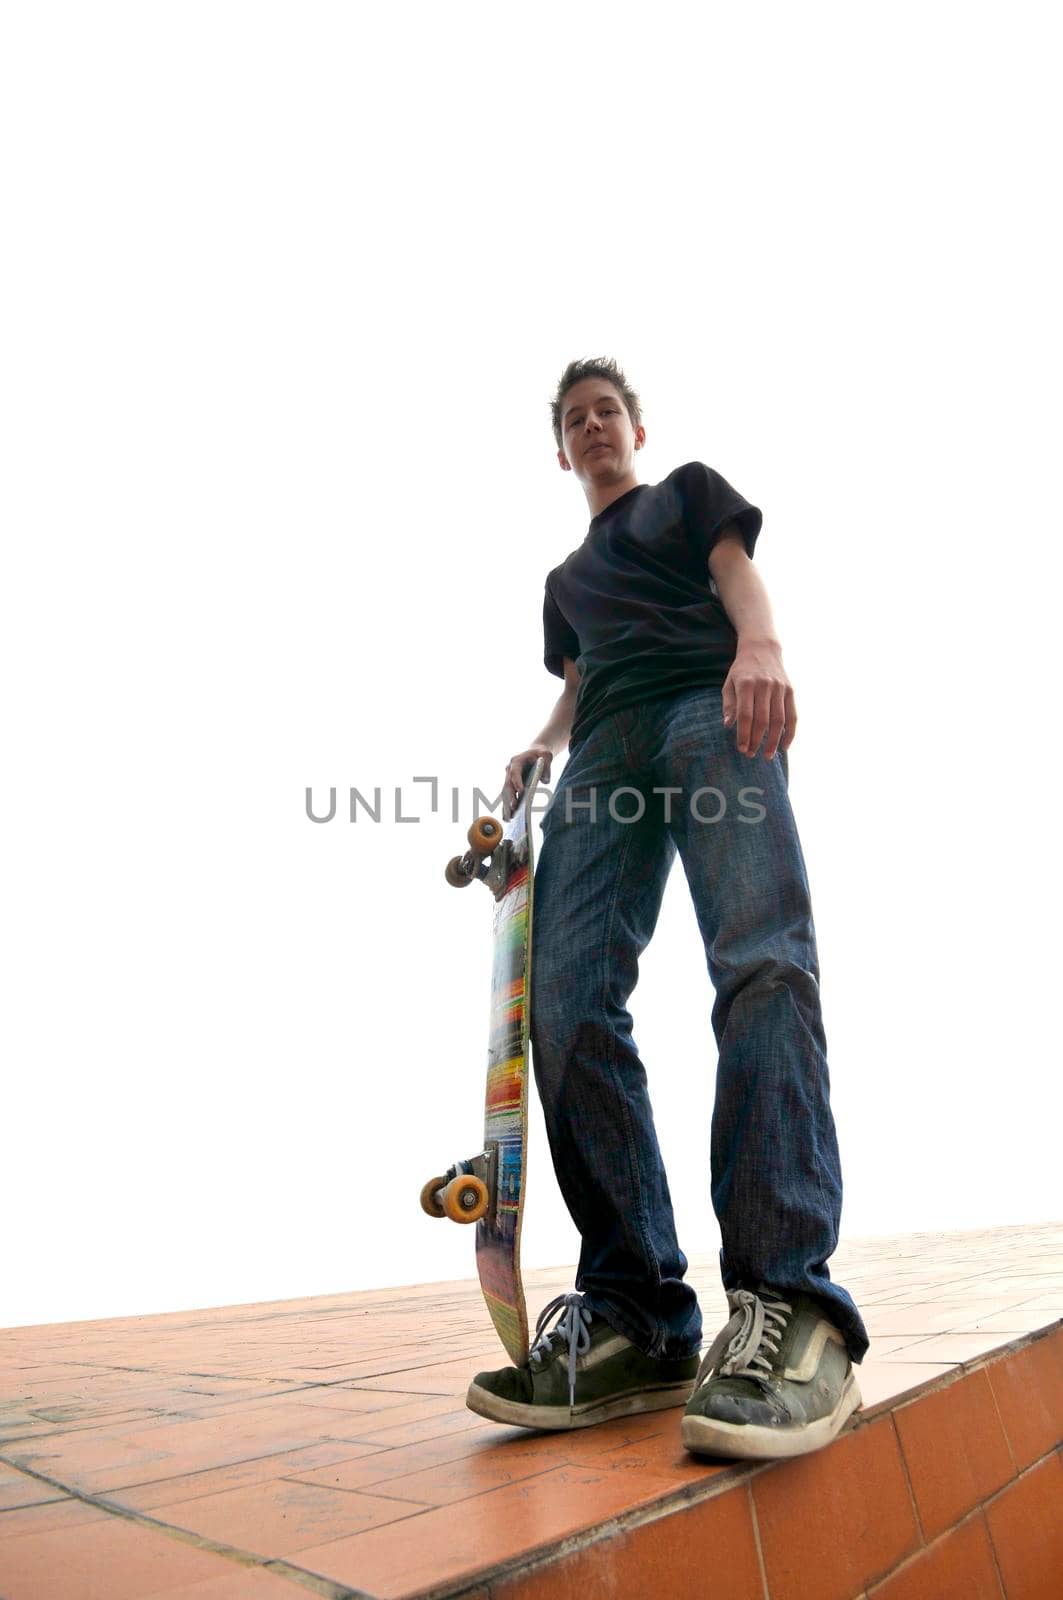 Boy practicing skate in a skate park - isolated